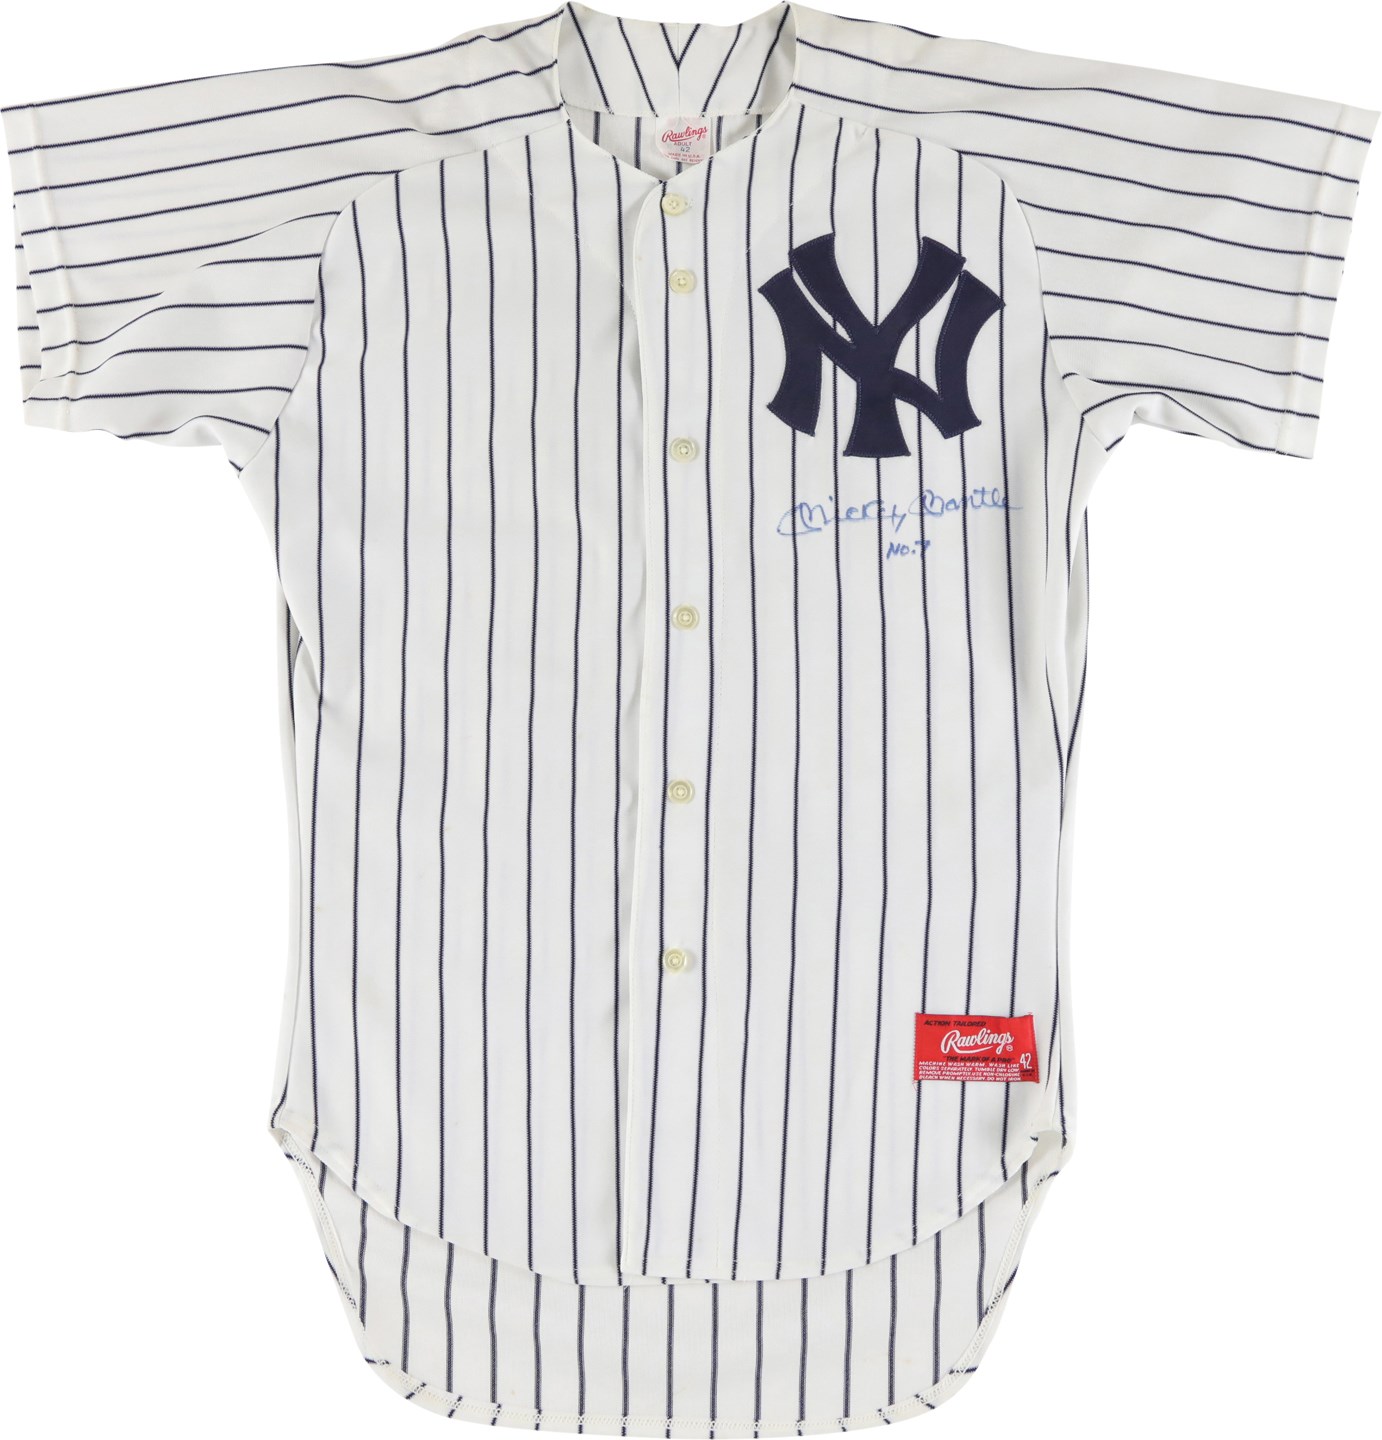 Baseball Autographs - Mickey Mantle Signed New York Yankees Jersey with No. 7 Inscription